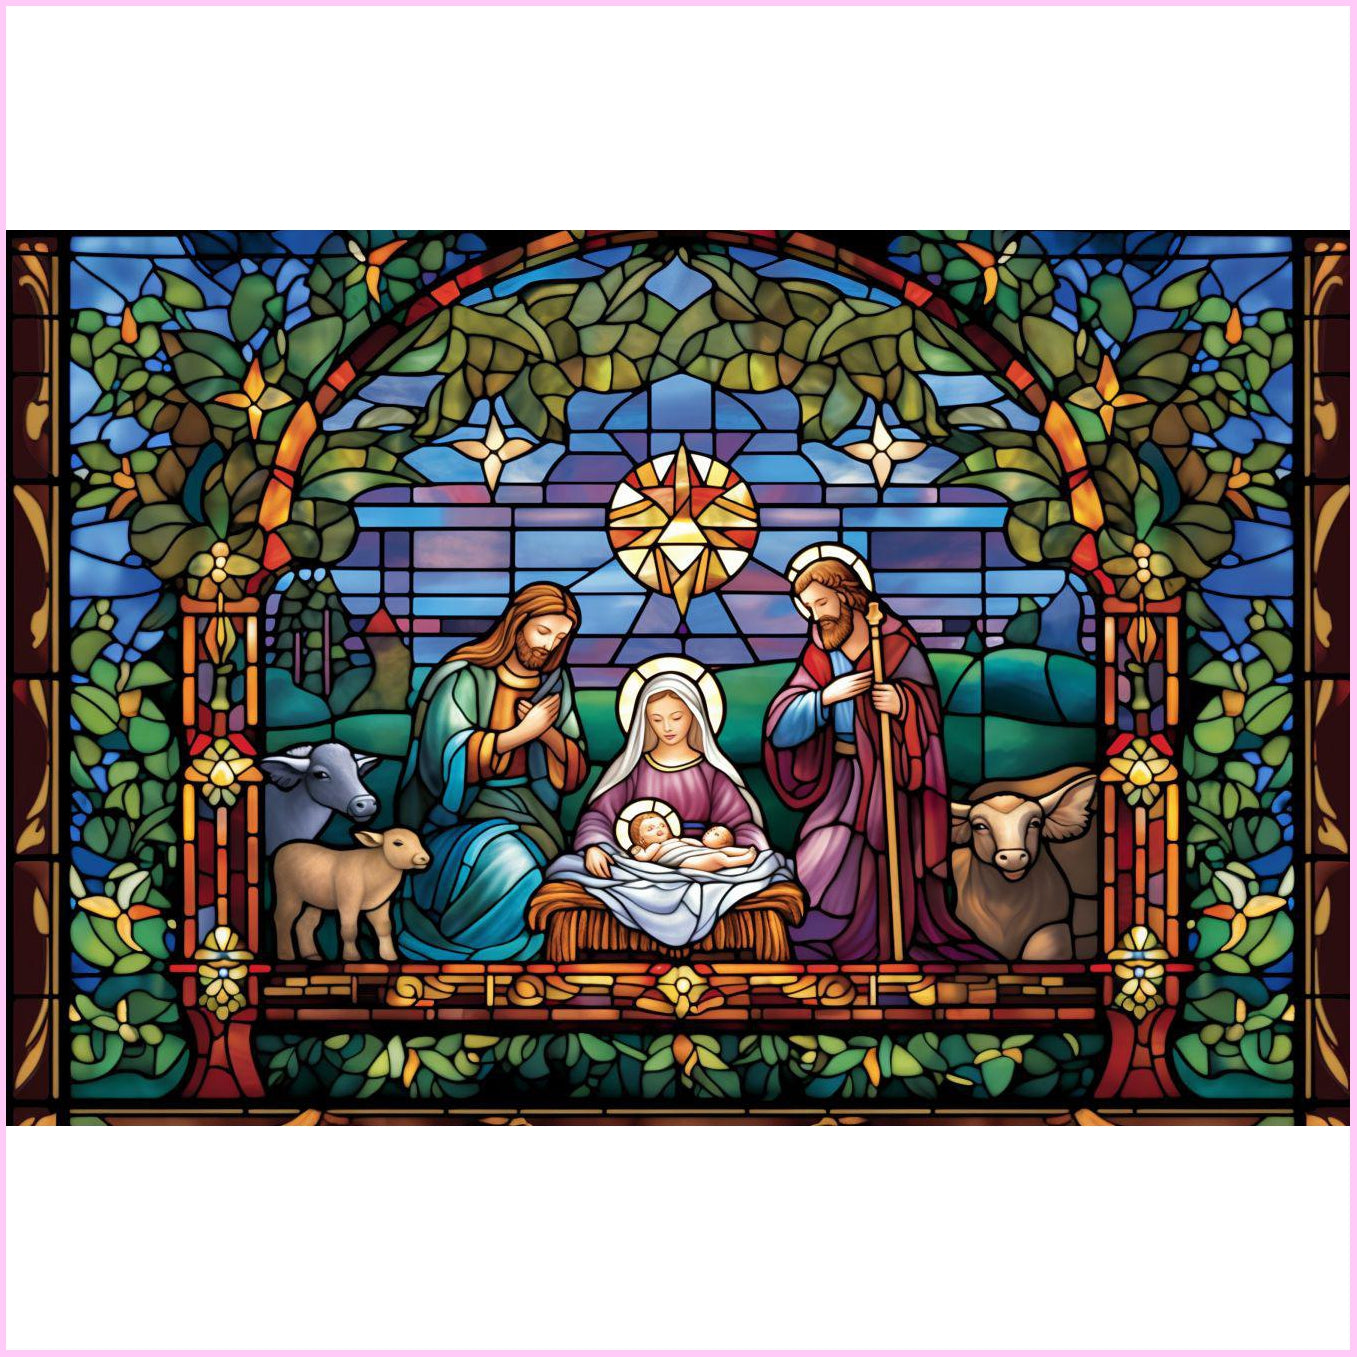 Serene Family Stained Glass Diamond Painting Kit-75x50cm (30x20 in)-Heartful Diamonds